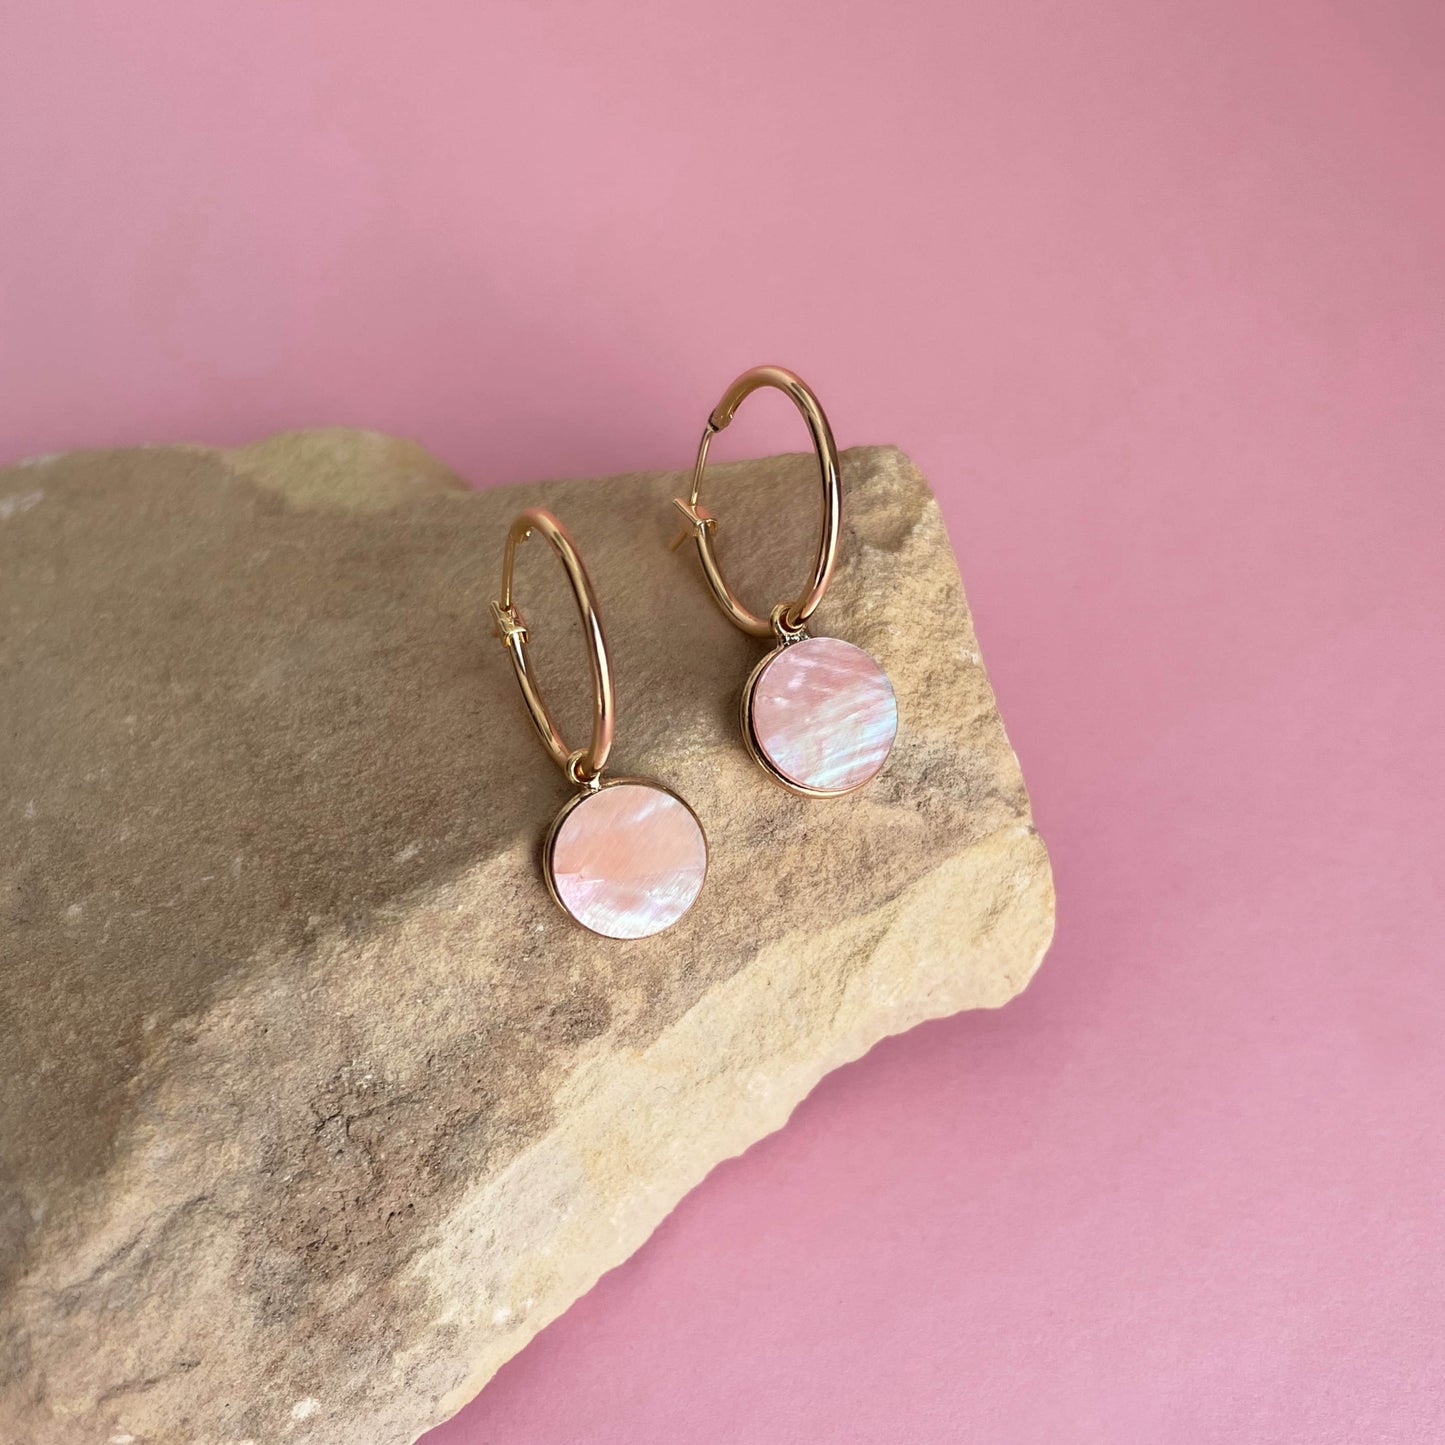 Gaia Reversible Pearl Earrings in Pink and White